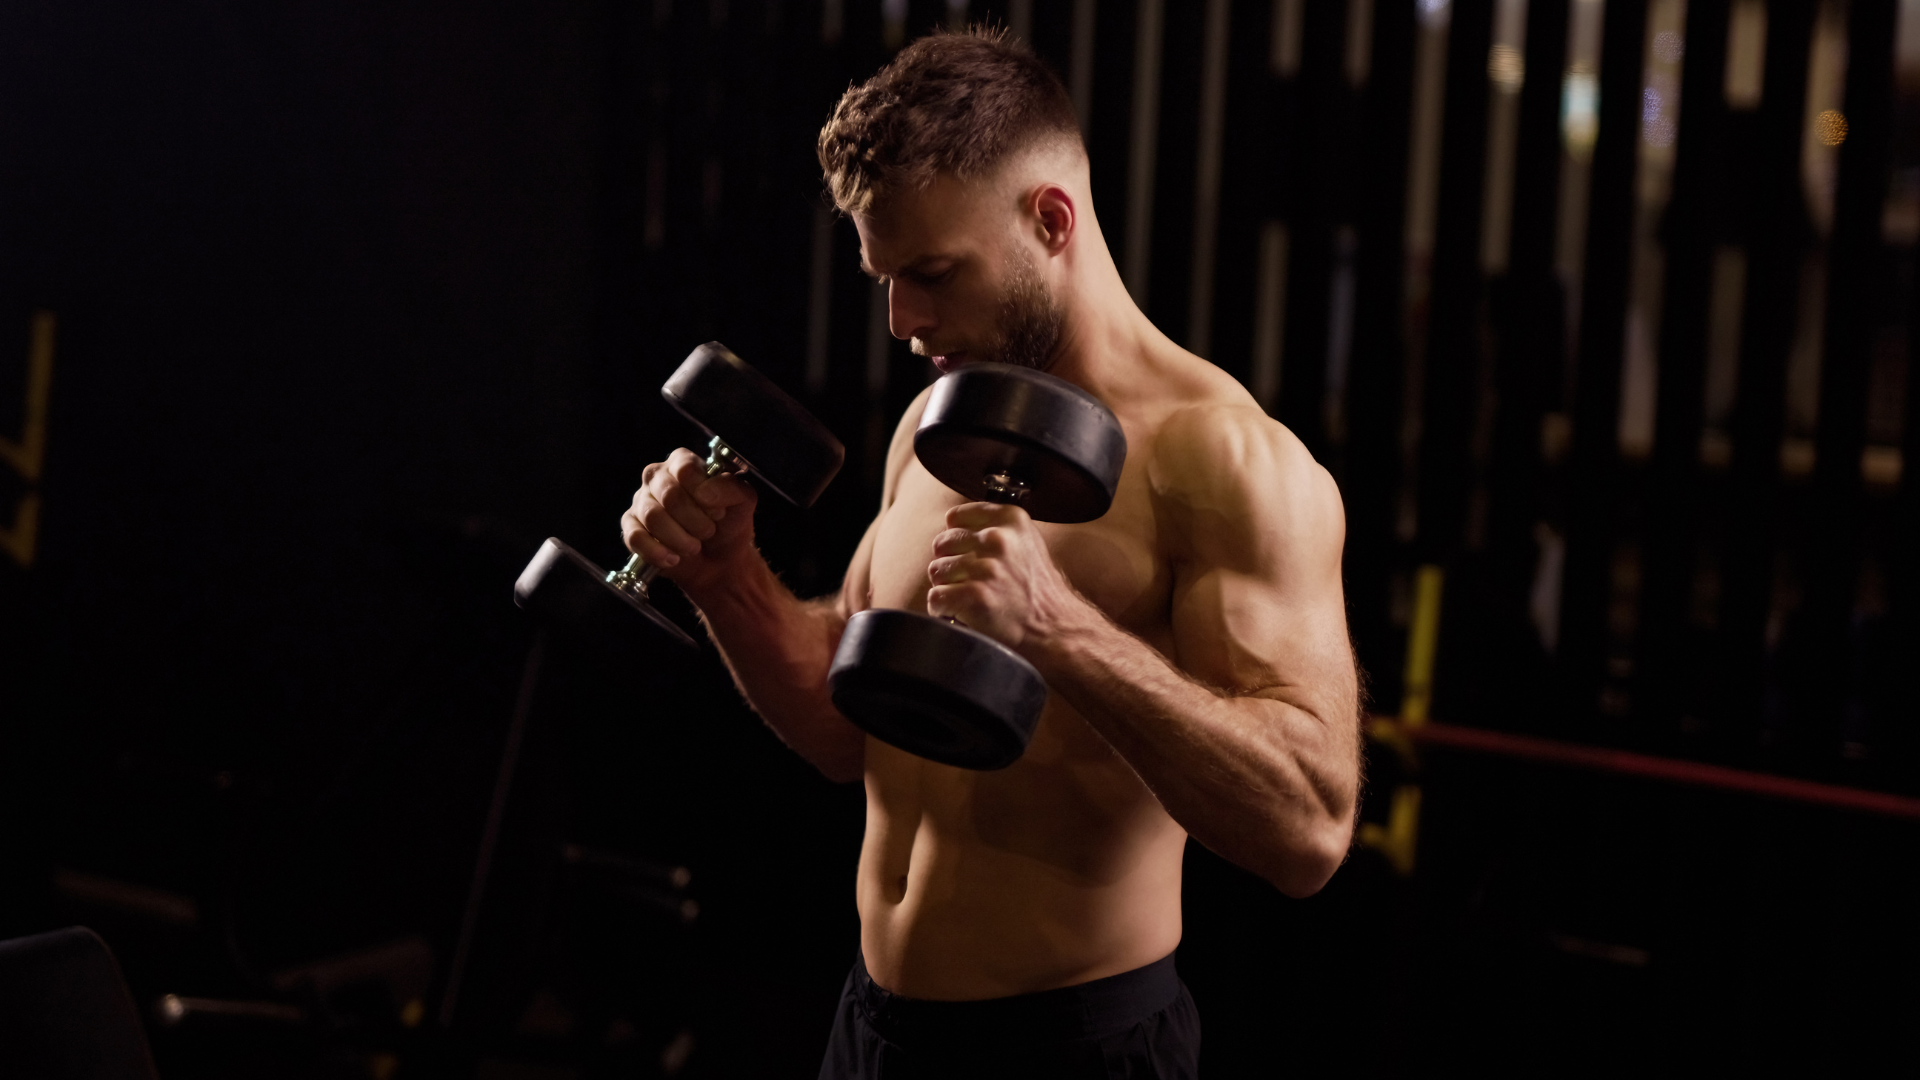 bicep curls or hammer curls: which is best for adding size to your biceps?